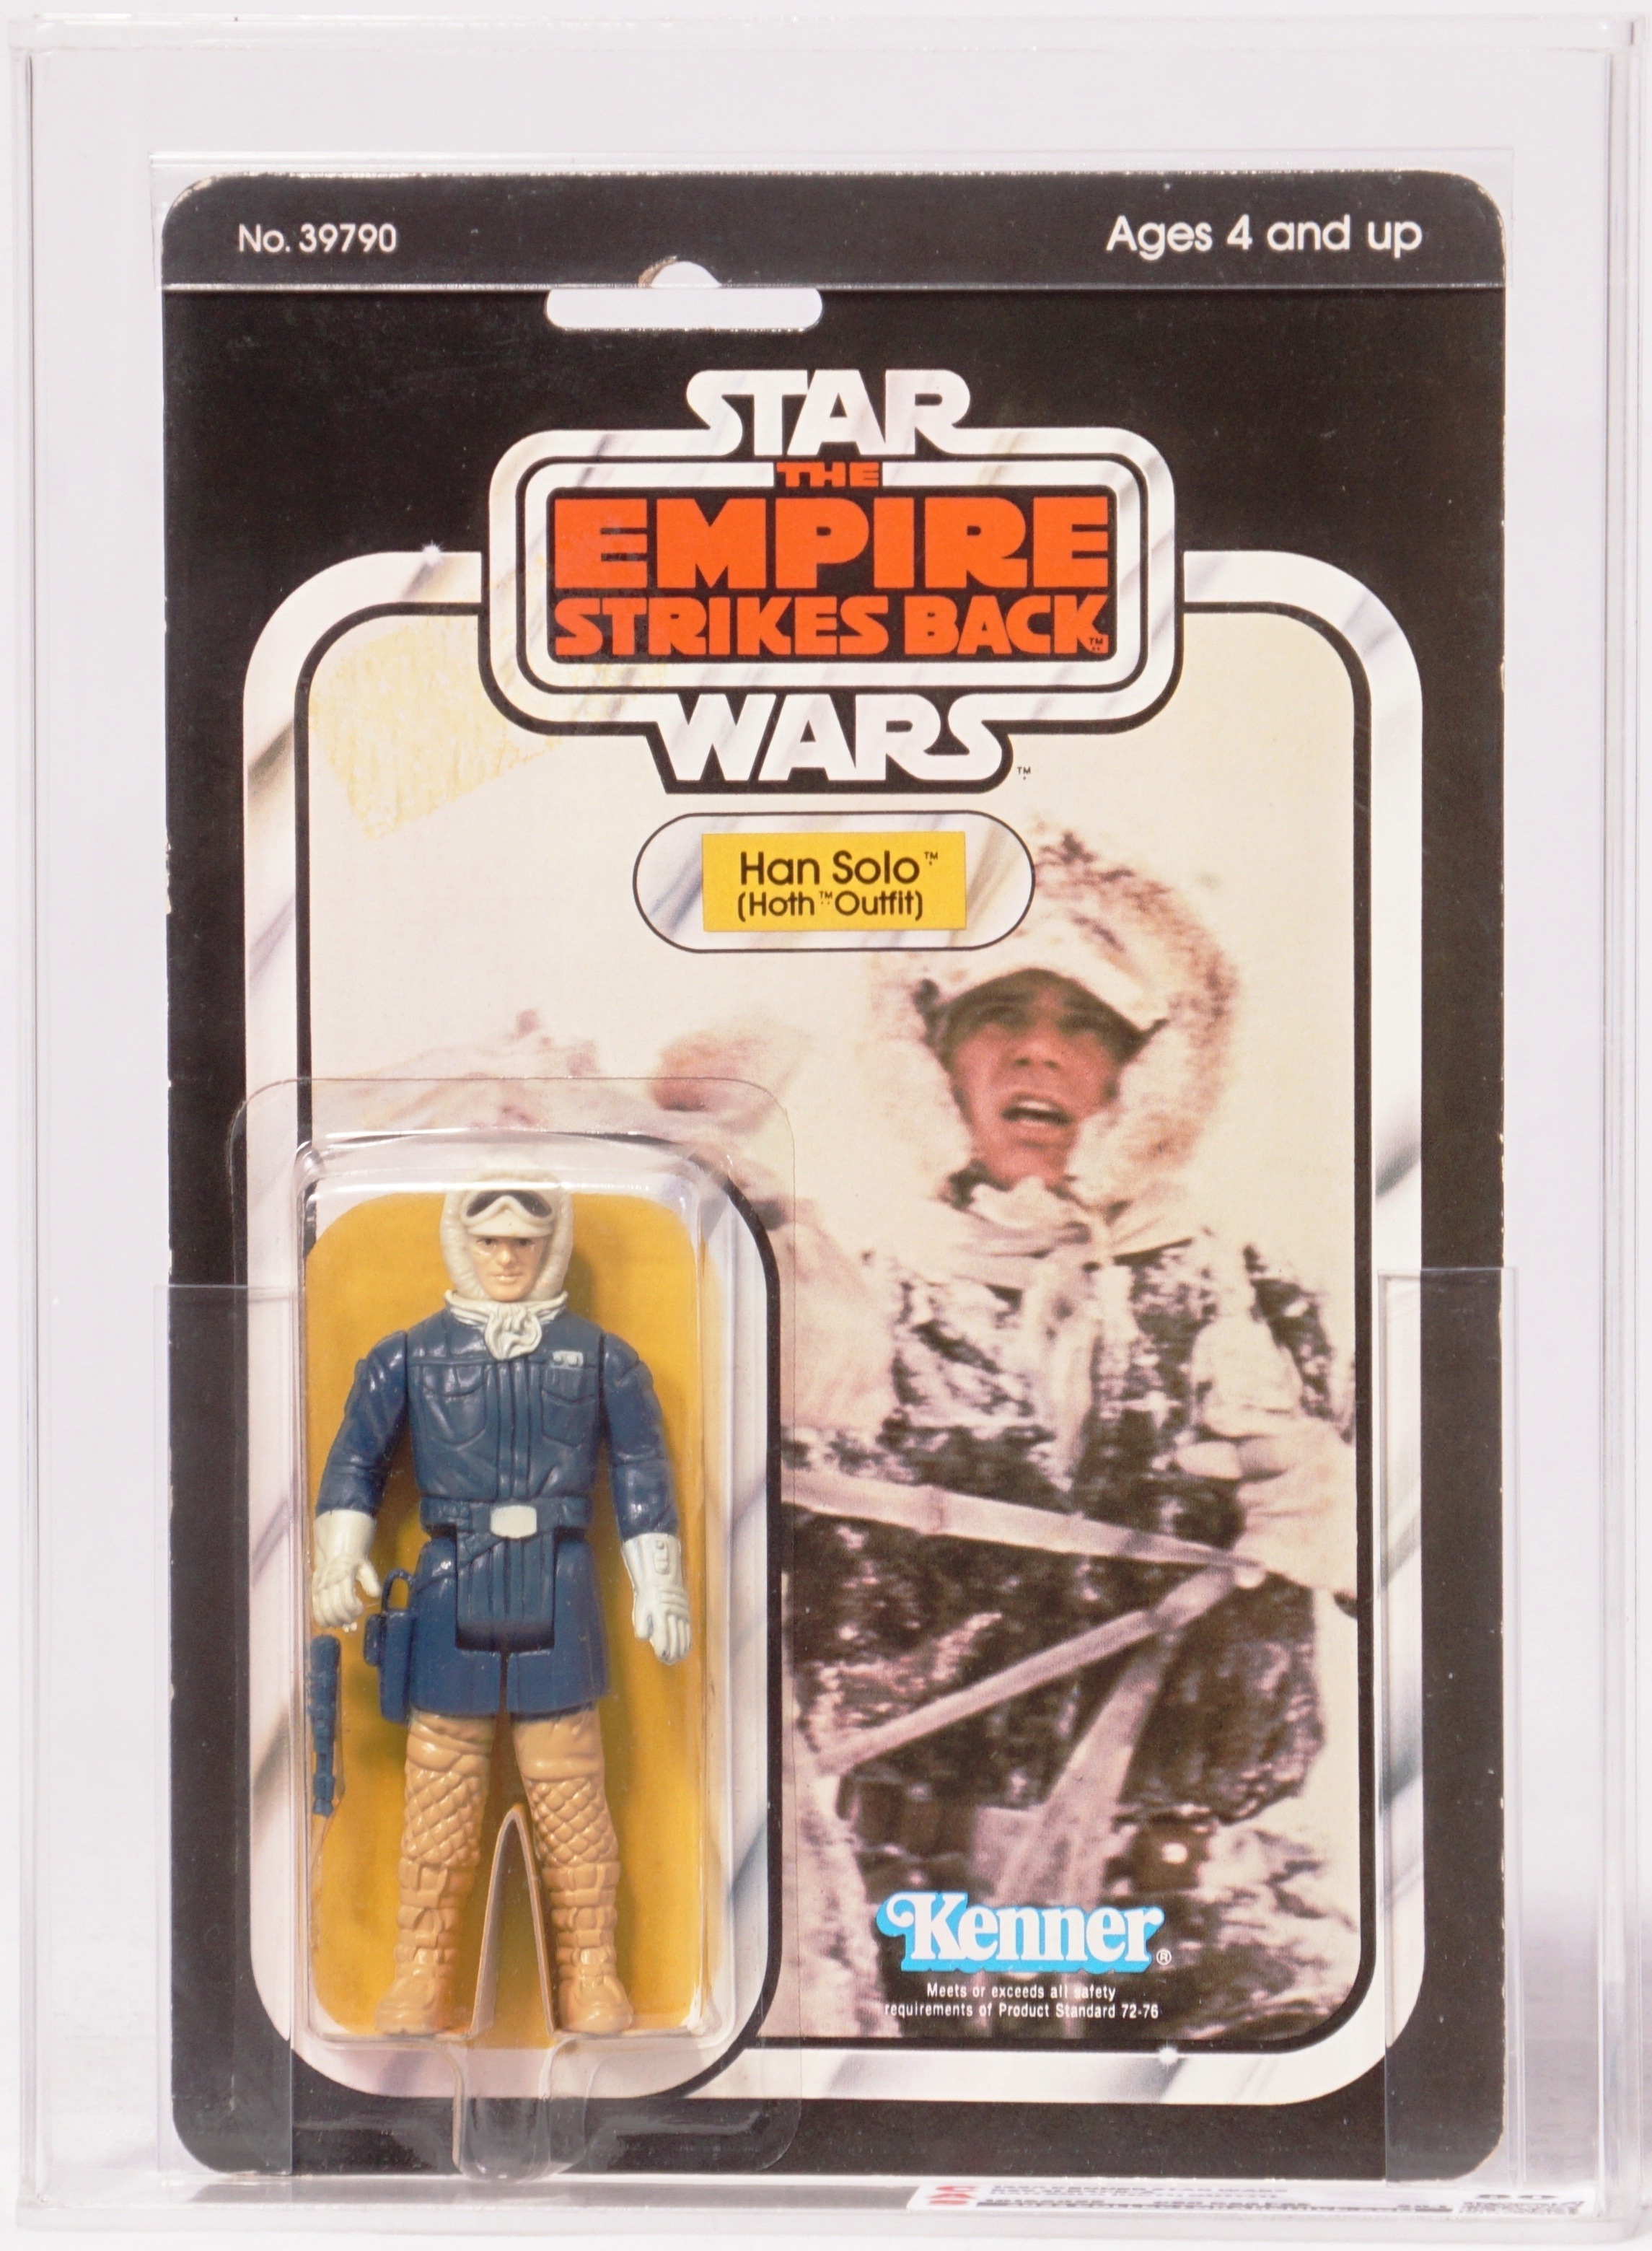 Star Wars Carded Action Figure - Han Solo (Hoth Outfit)